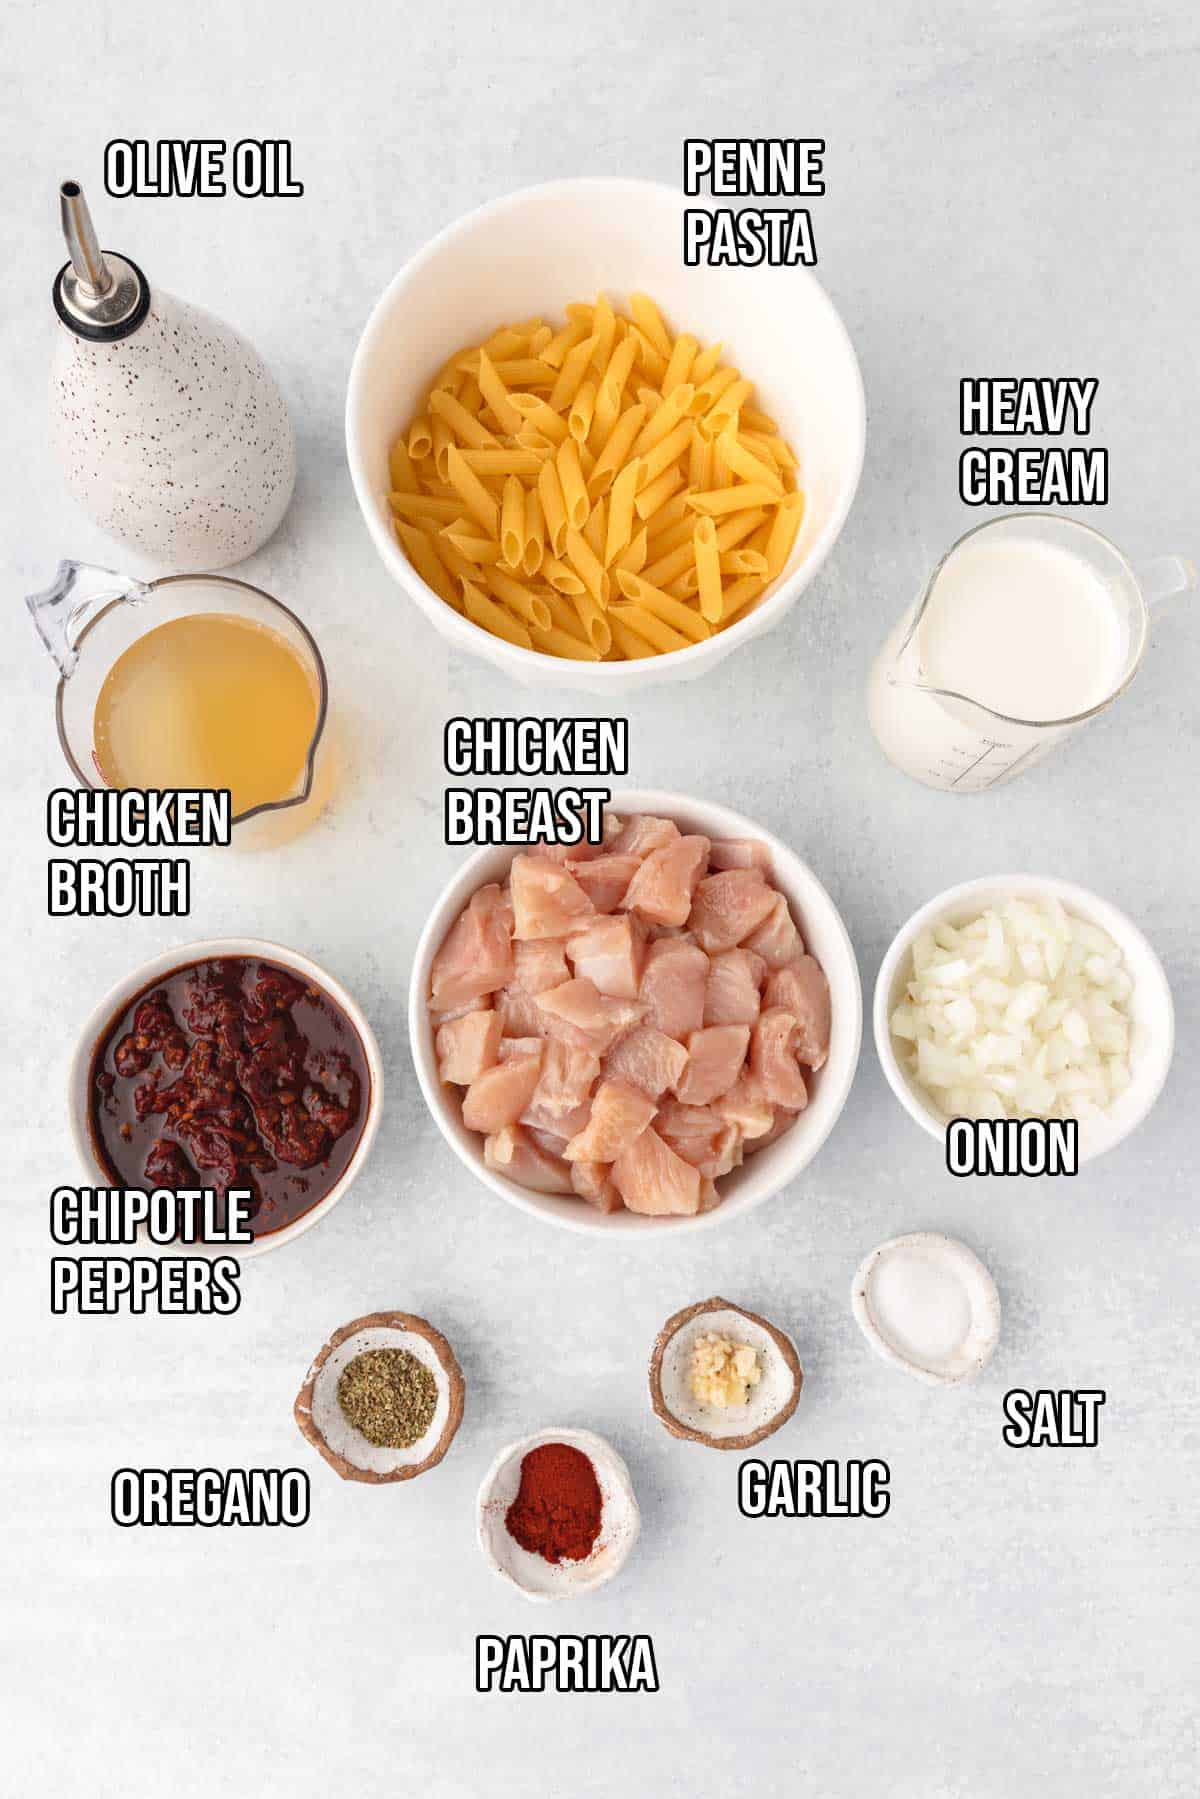 Spicy chipotle chicken pasta ingredients: chicken breasts cut into bite sized pieces, penne pasta, olive oil, minced garlic, diced onion, chipotle peppers in adobo sauce, chicken broth, heavy cream, paprika, dried oregano, and kosher salt.